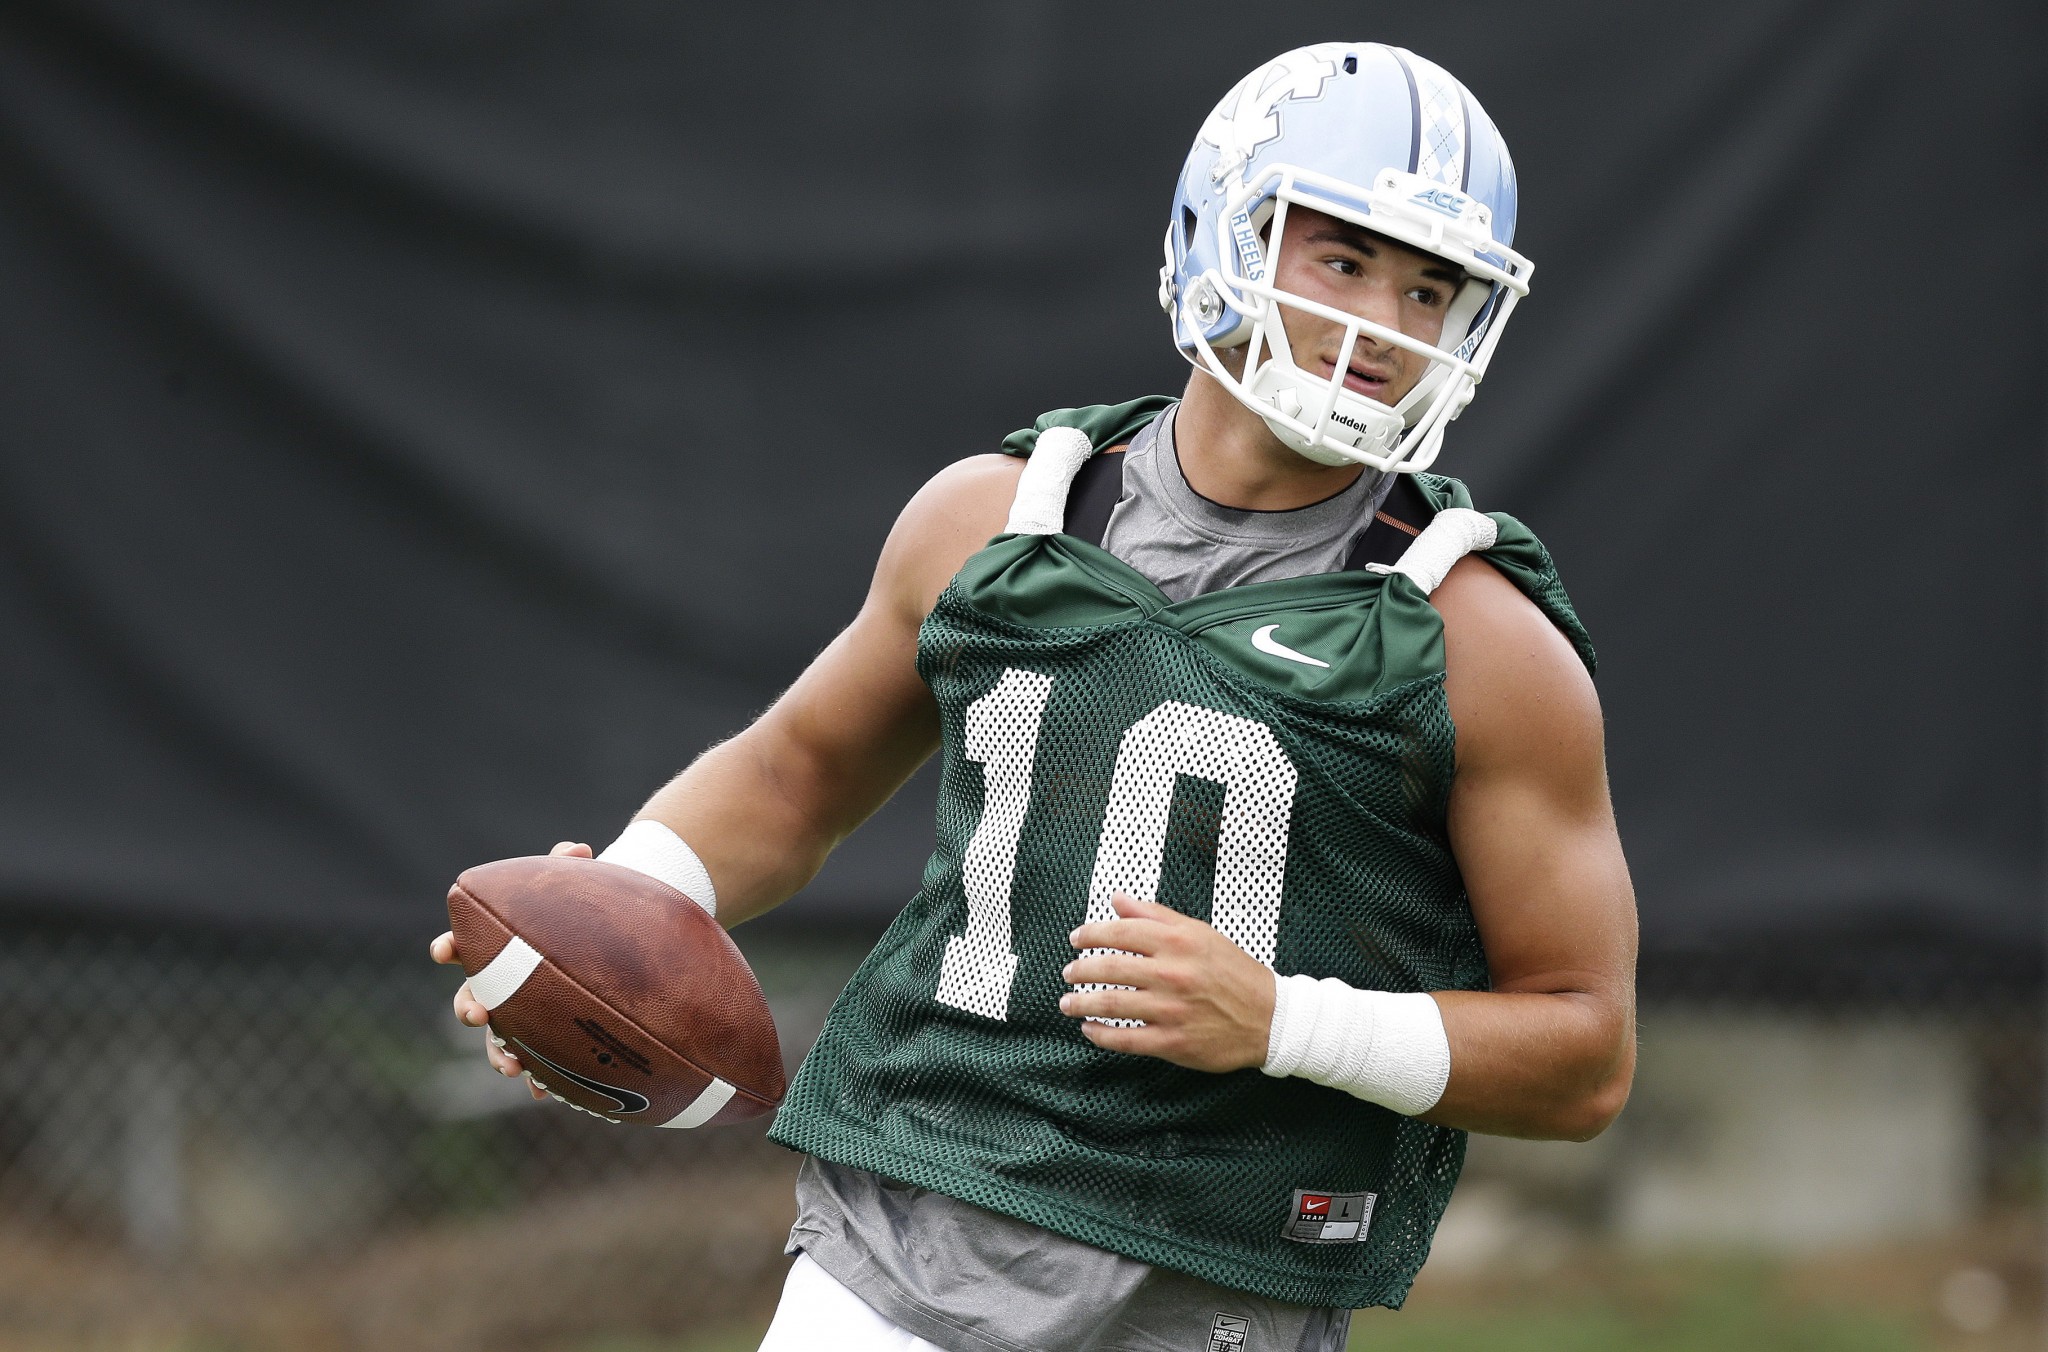 Mitch Trubisky was officially named UNC's starter in the spring. (AP Photo/Gerry Broome)